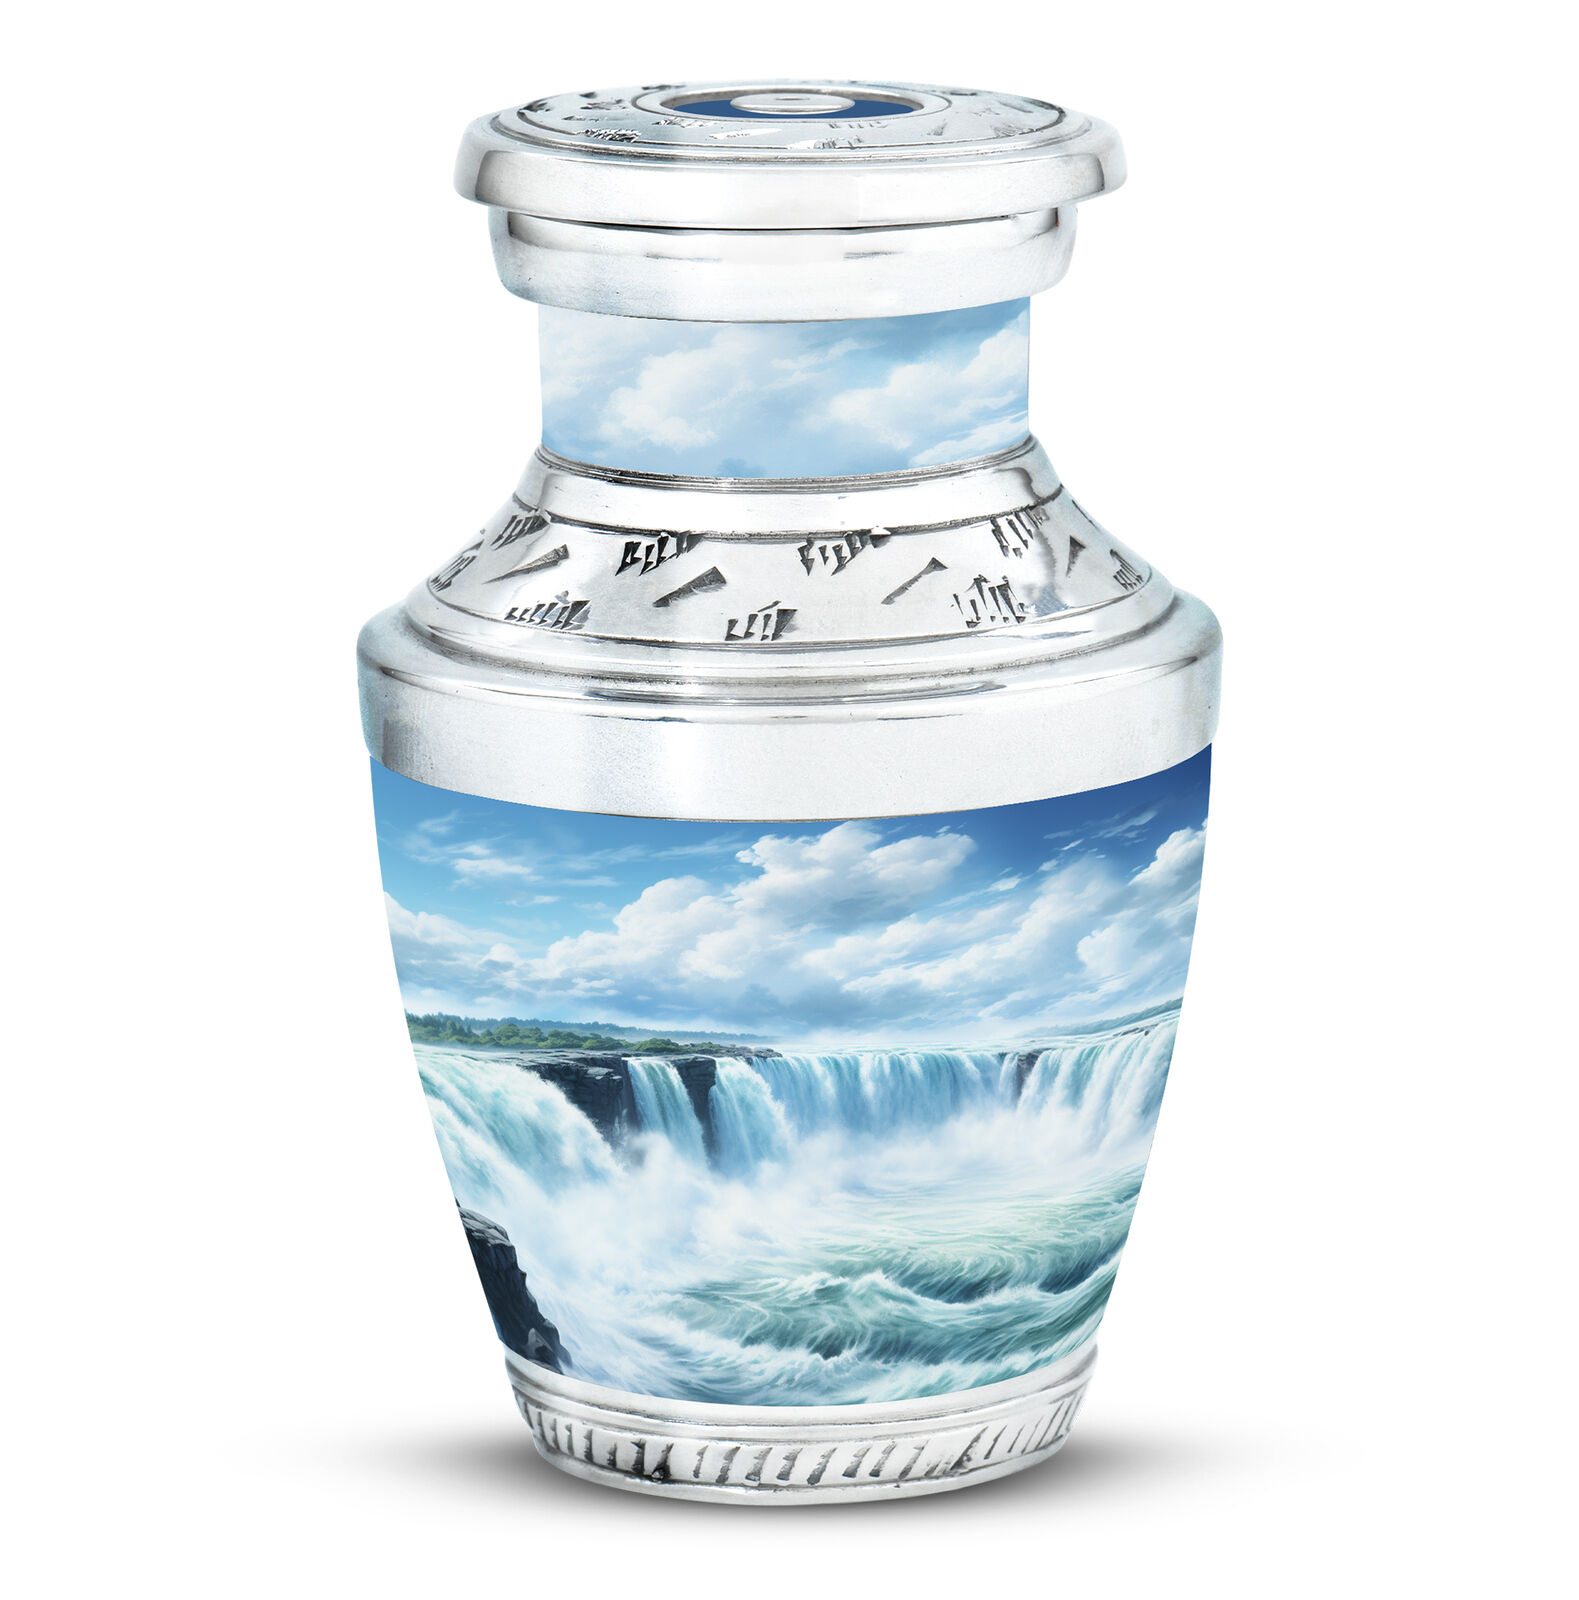 Small Keepsake Urn For Ashes Waterfall At Moning (3 Inch) Pack Of 1